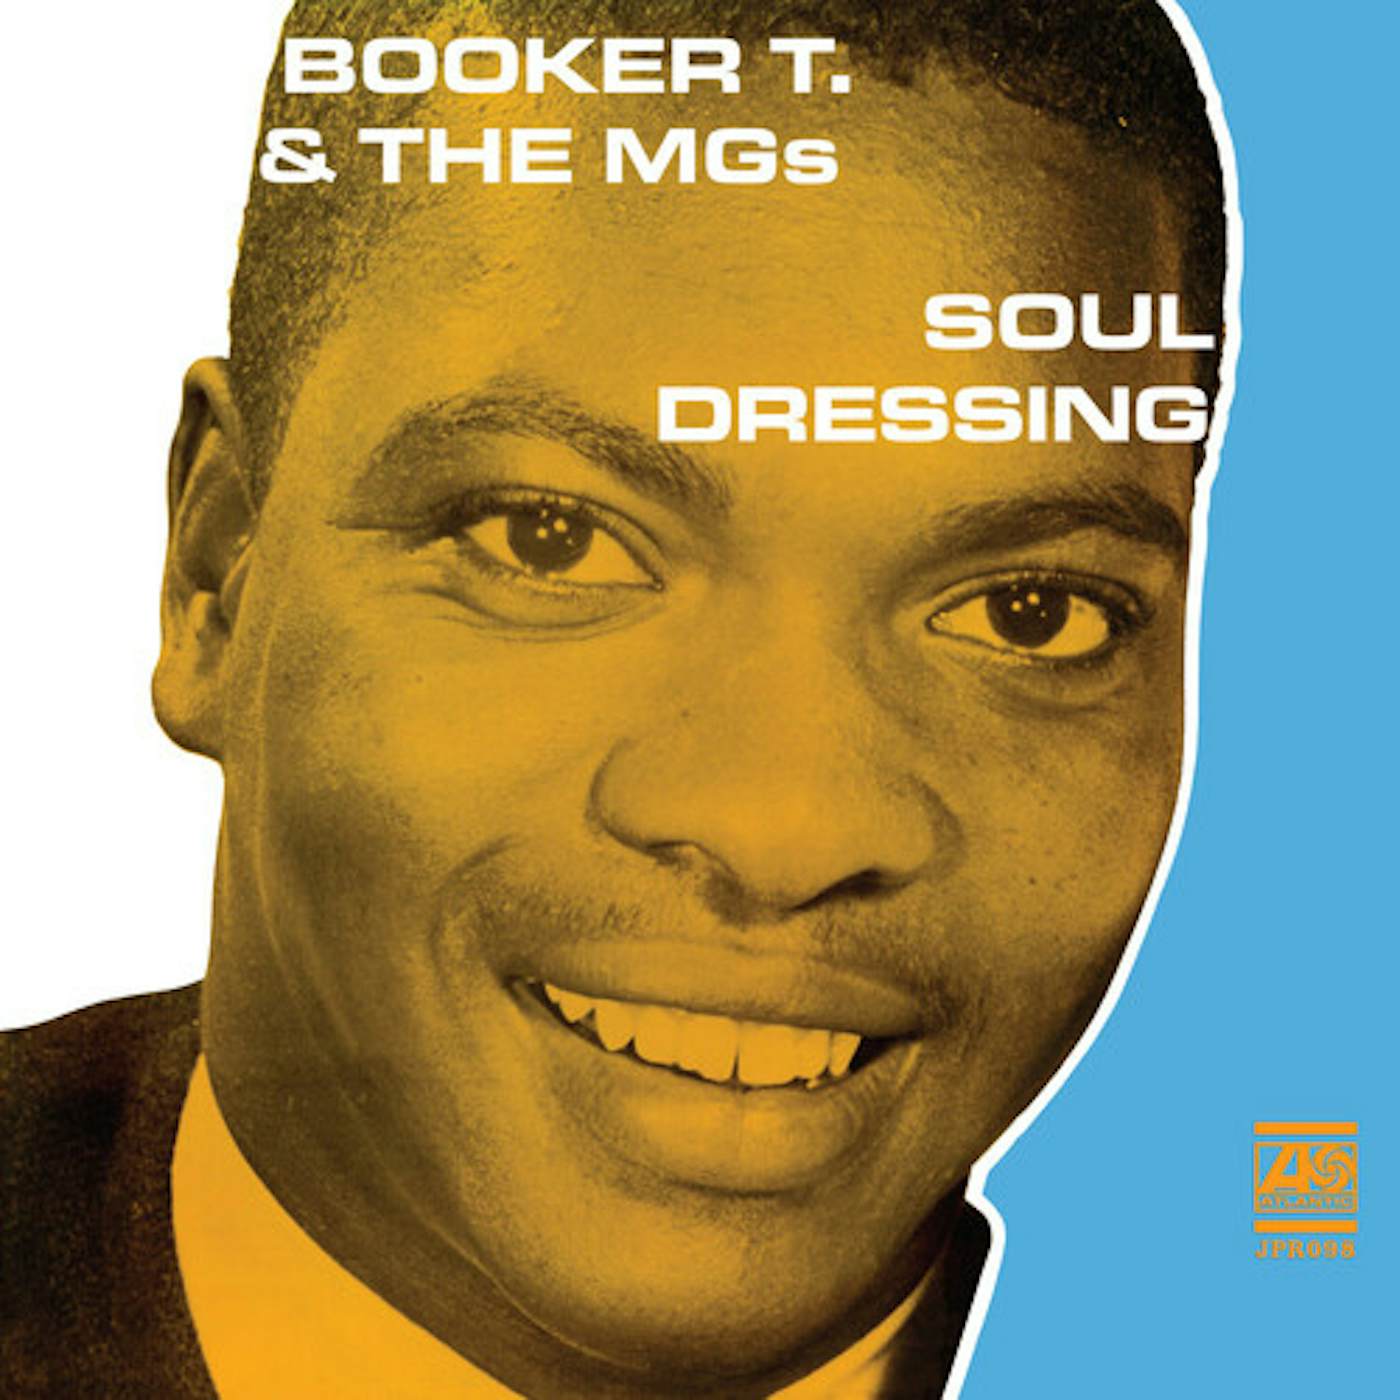 Booker T. & the M.G.'s Soul Dressing (Limited Clear) Vinyl Record